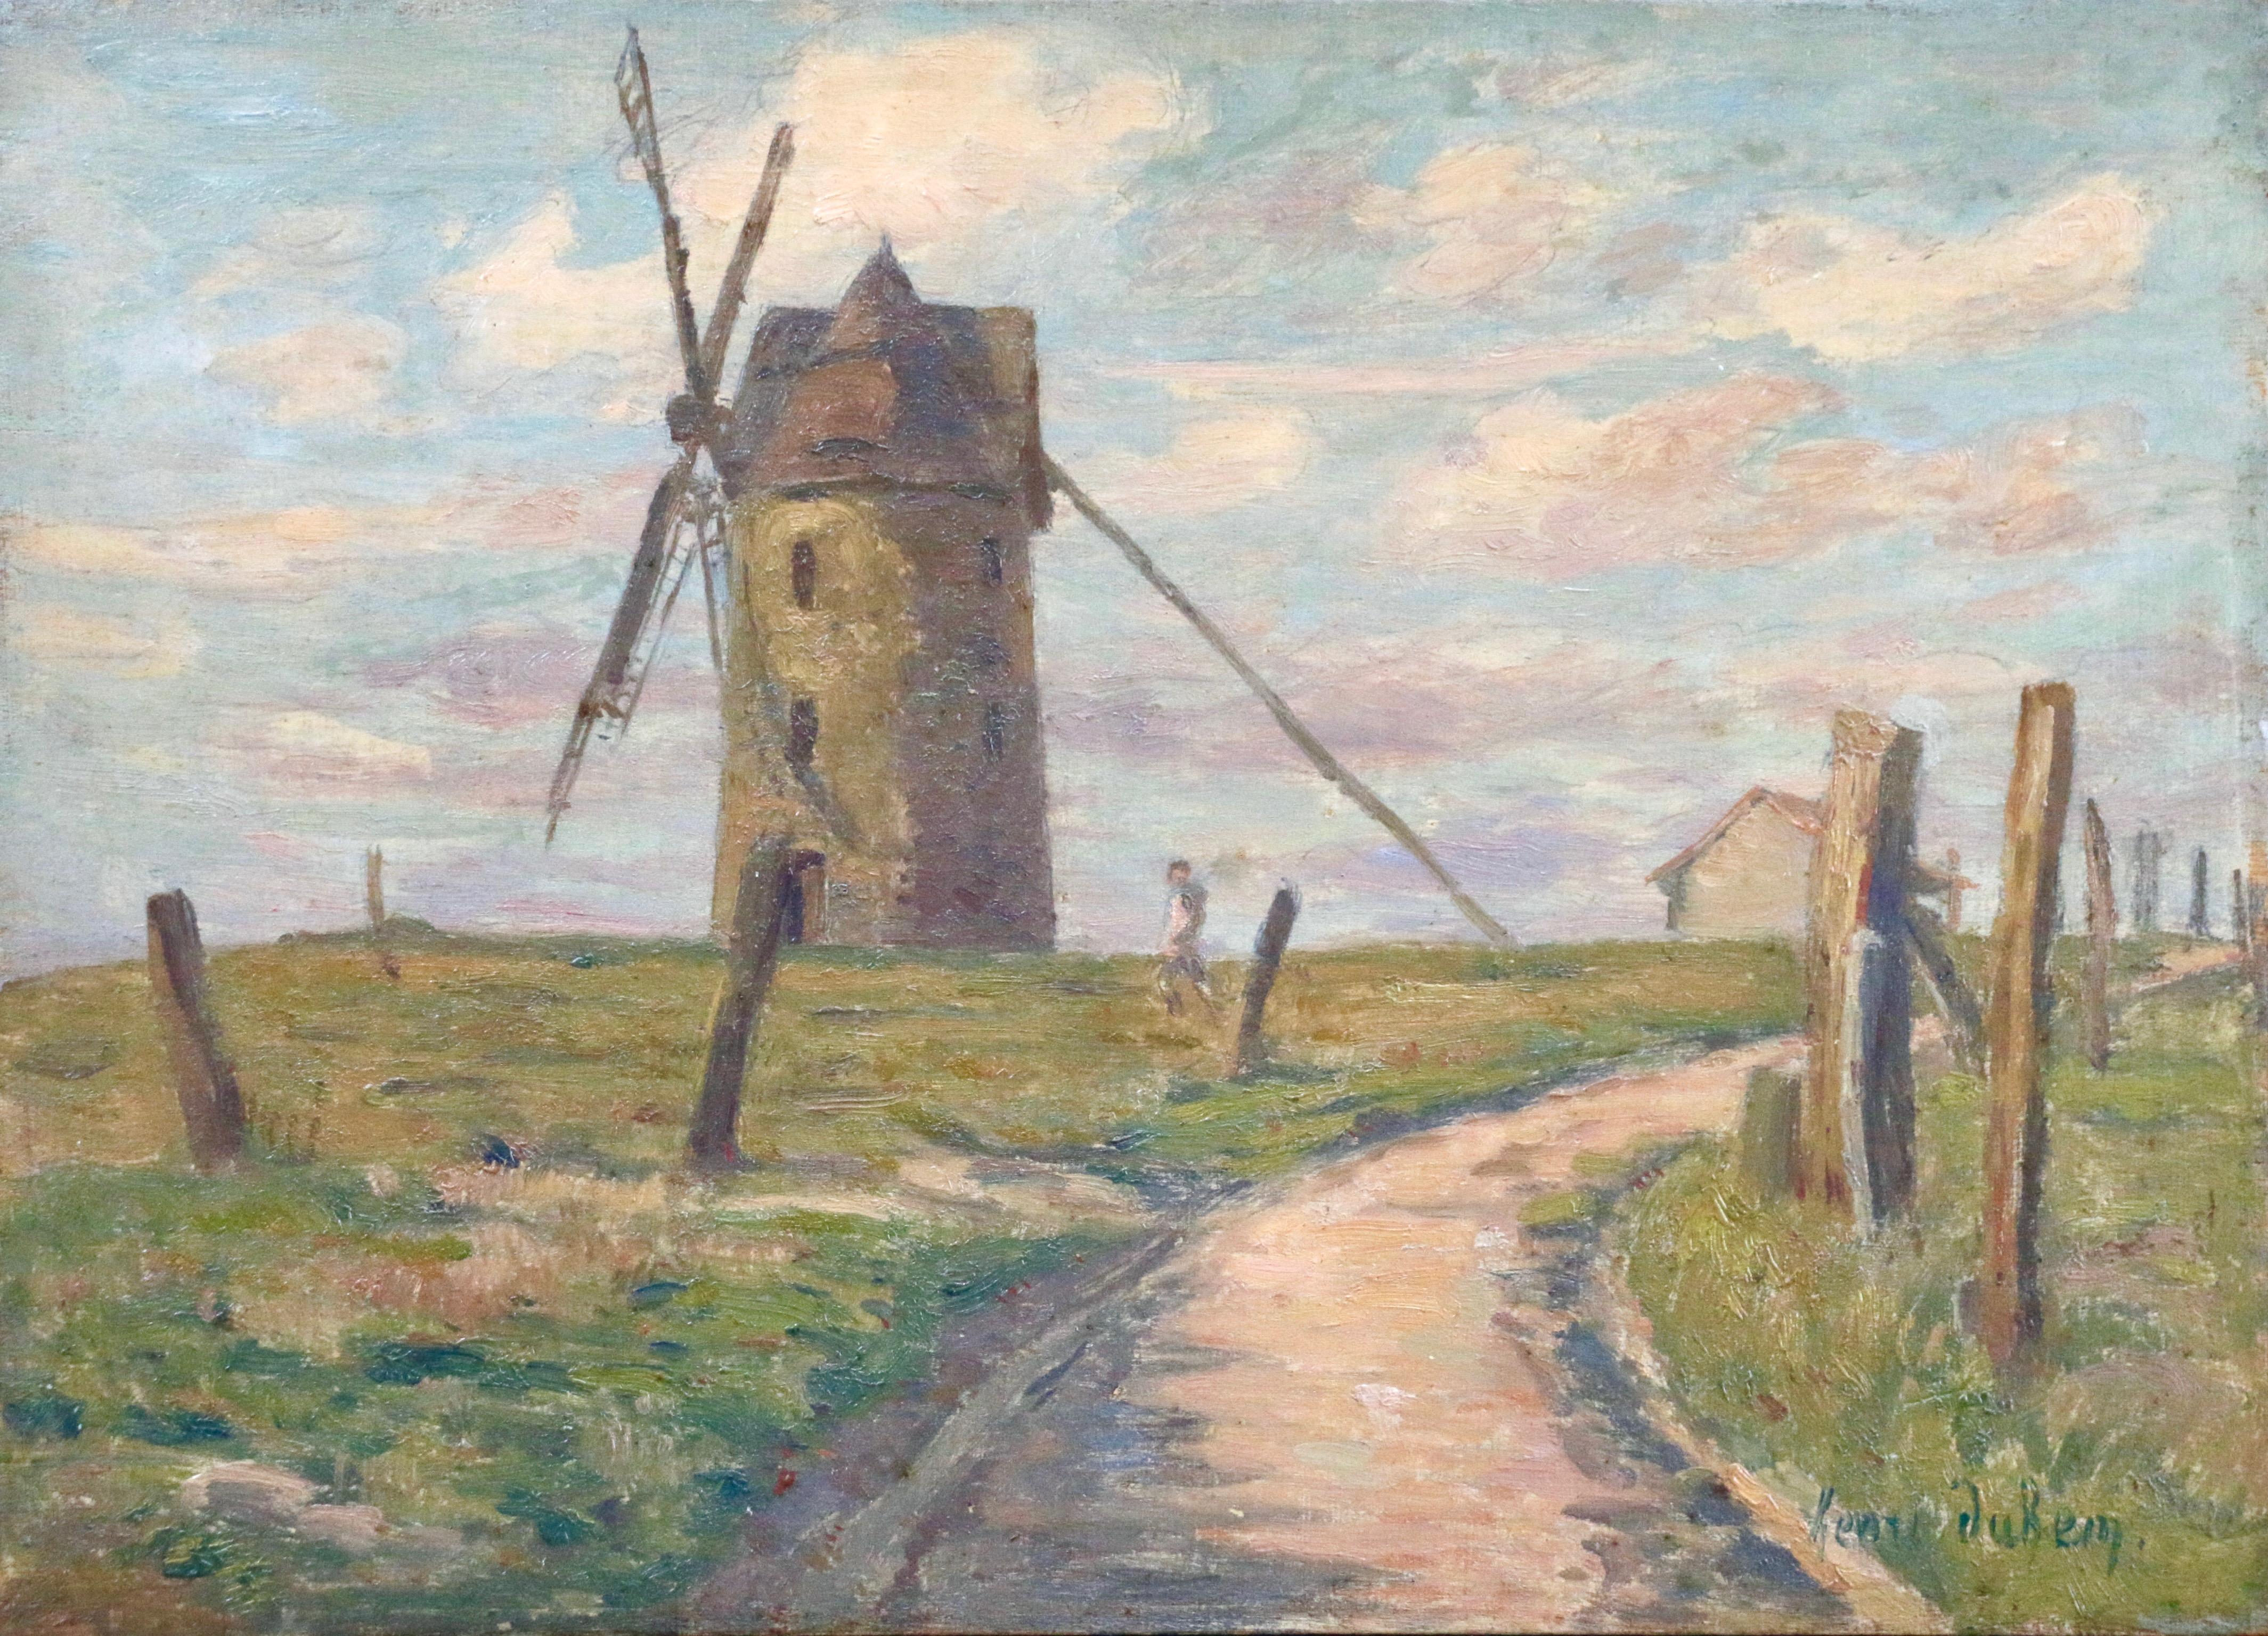 Henri Duhem Figurative Painting - Le Moulin - 19th Century Oil, Figure by Windmill in French Landscape by H Duhem